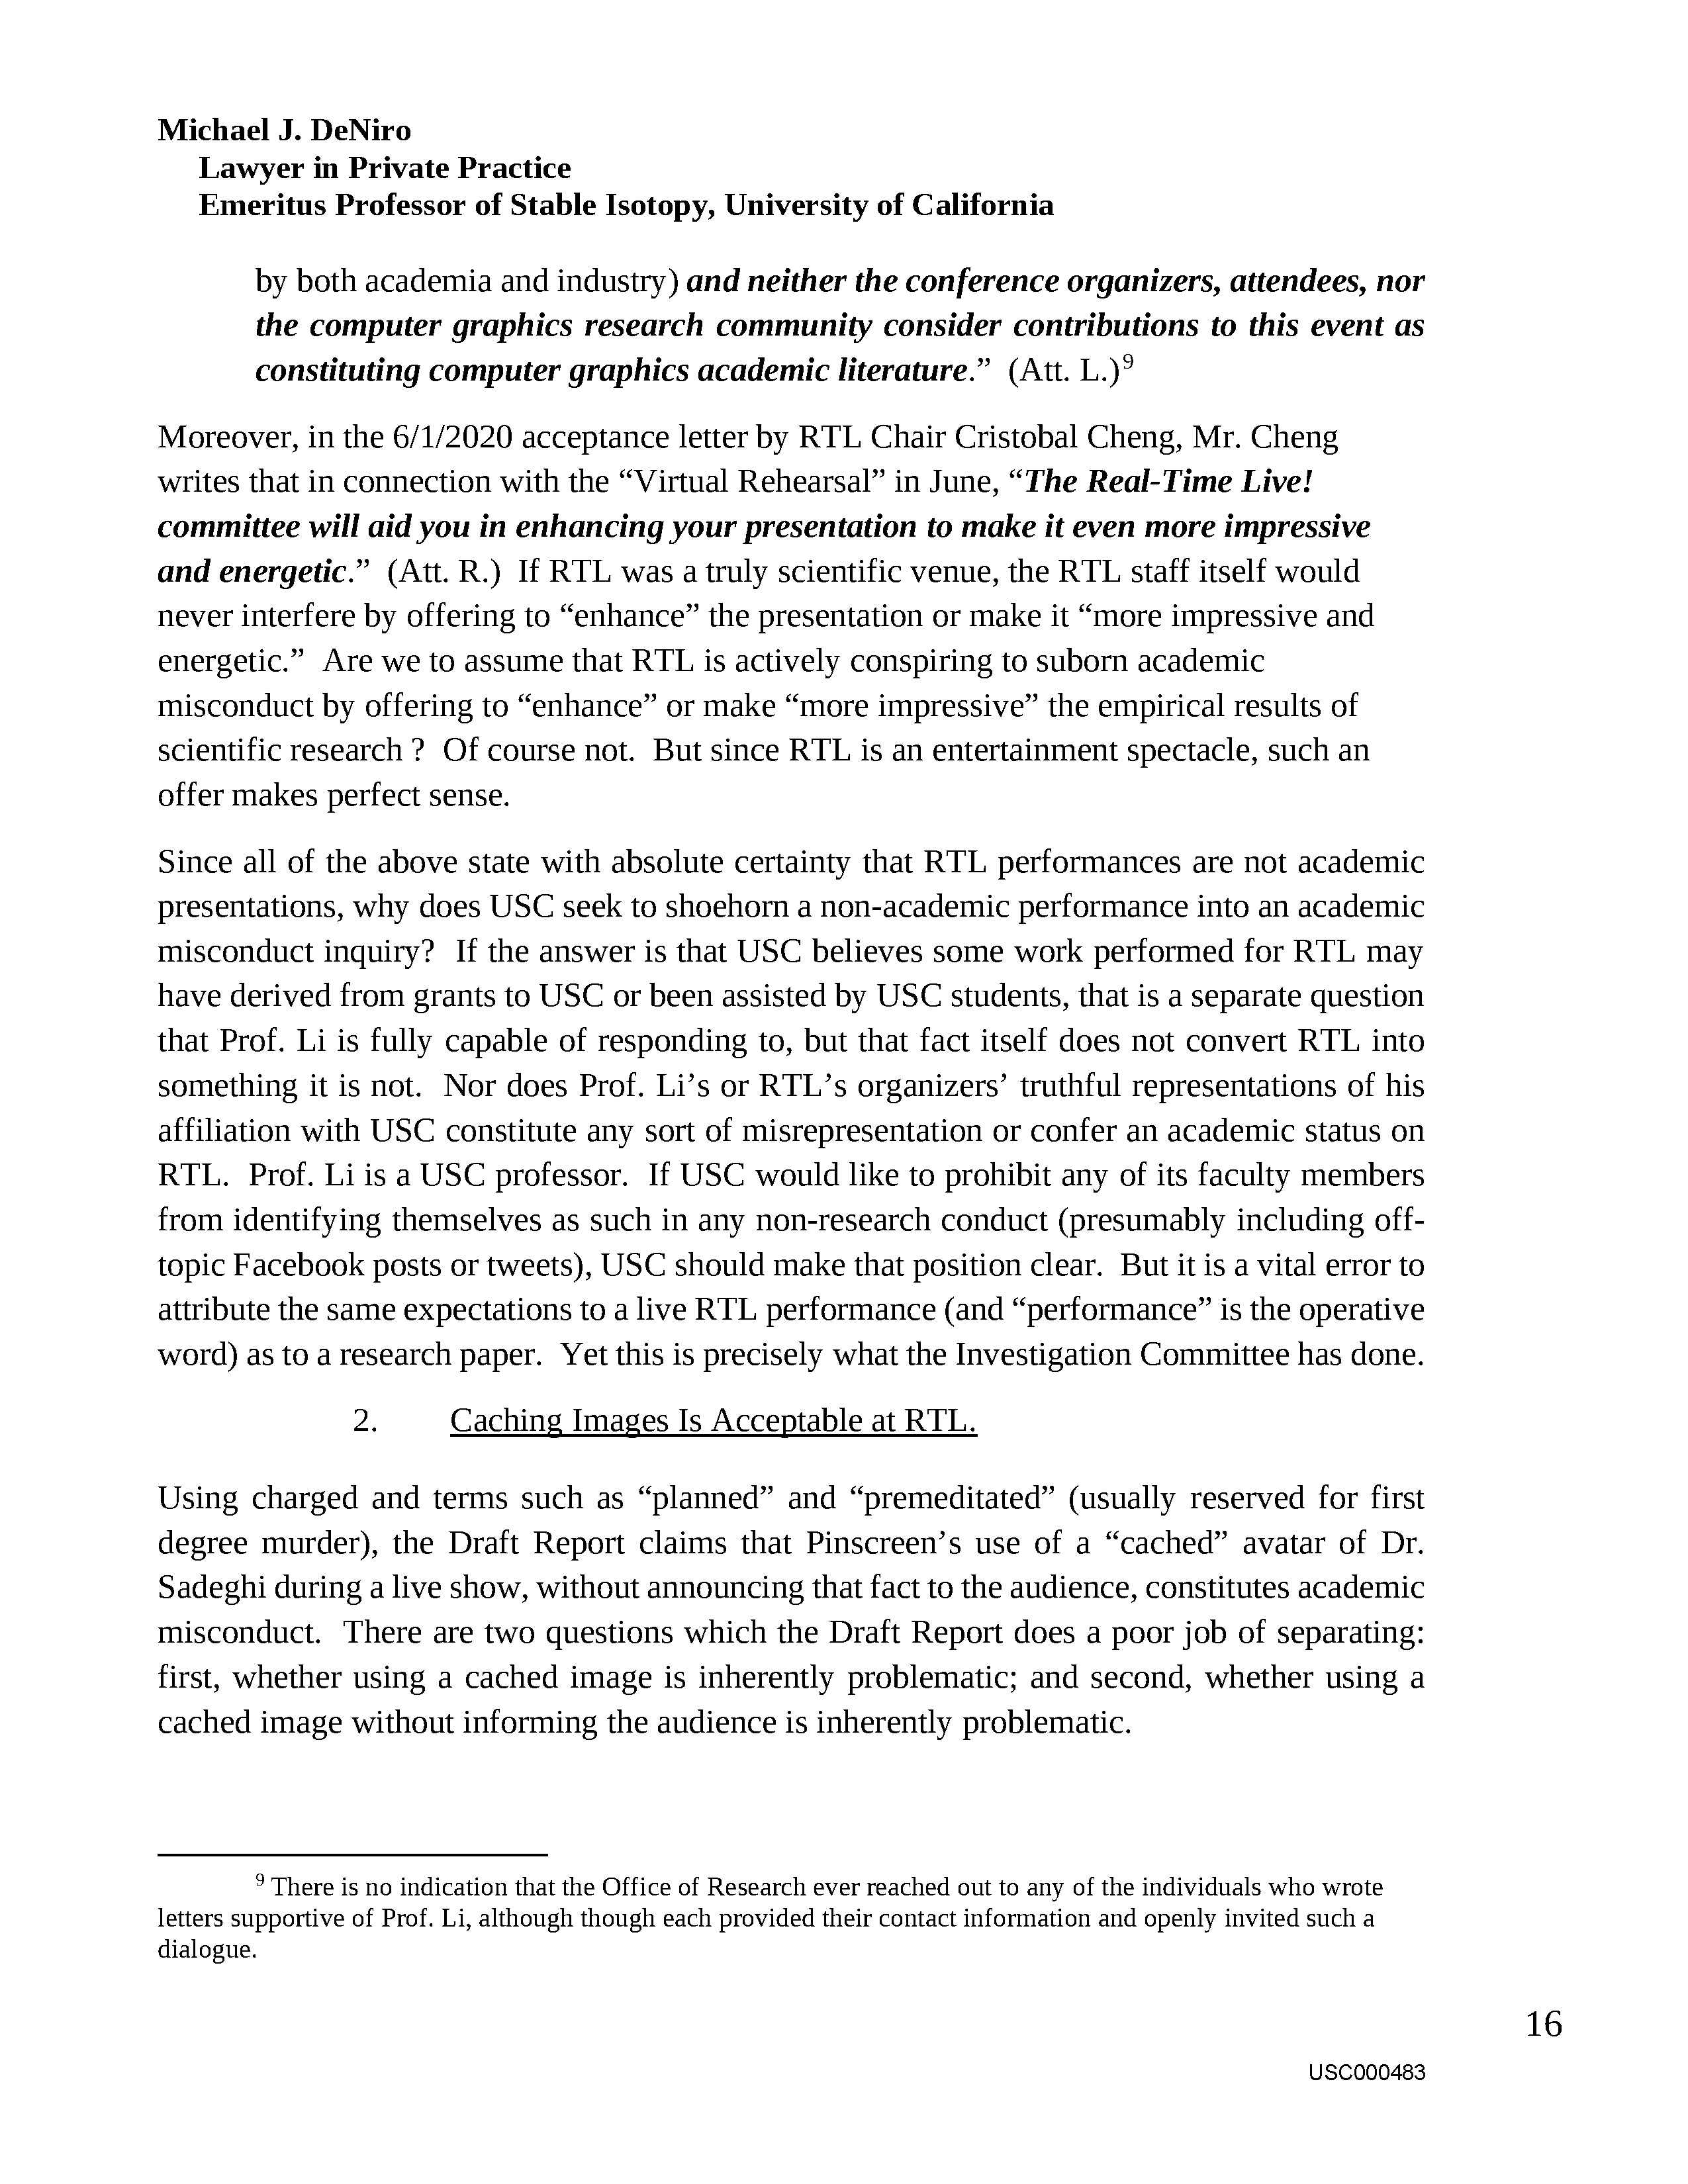 USC's Investigation Report re Hao Li's and Pinscreen's Scientific Misconduct at ACM SIGGRAPH RTL 2017 Page 485